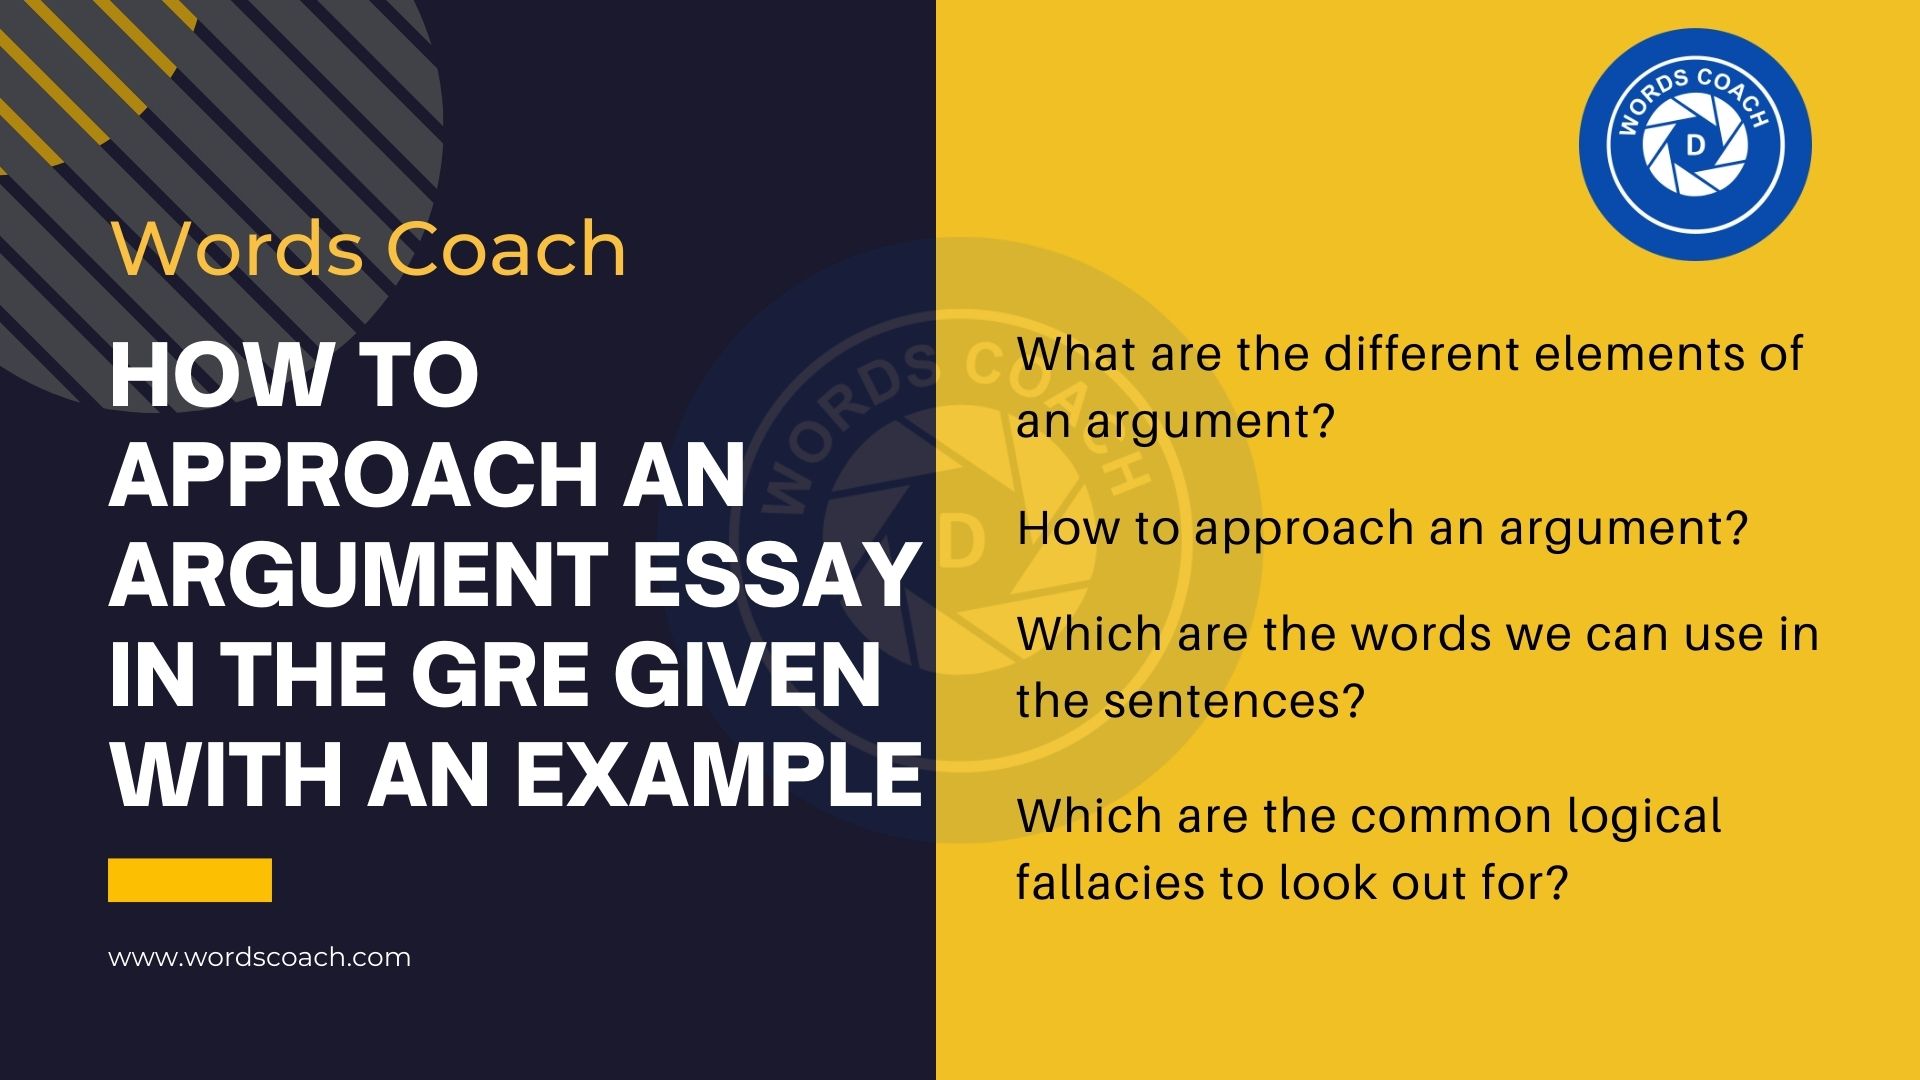 How to approach an Argument Essay in the GRE given with an example - wordscoach.com